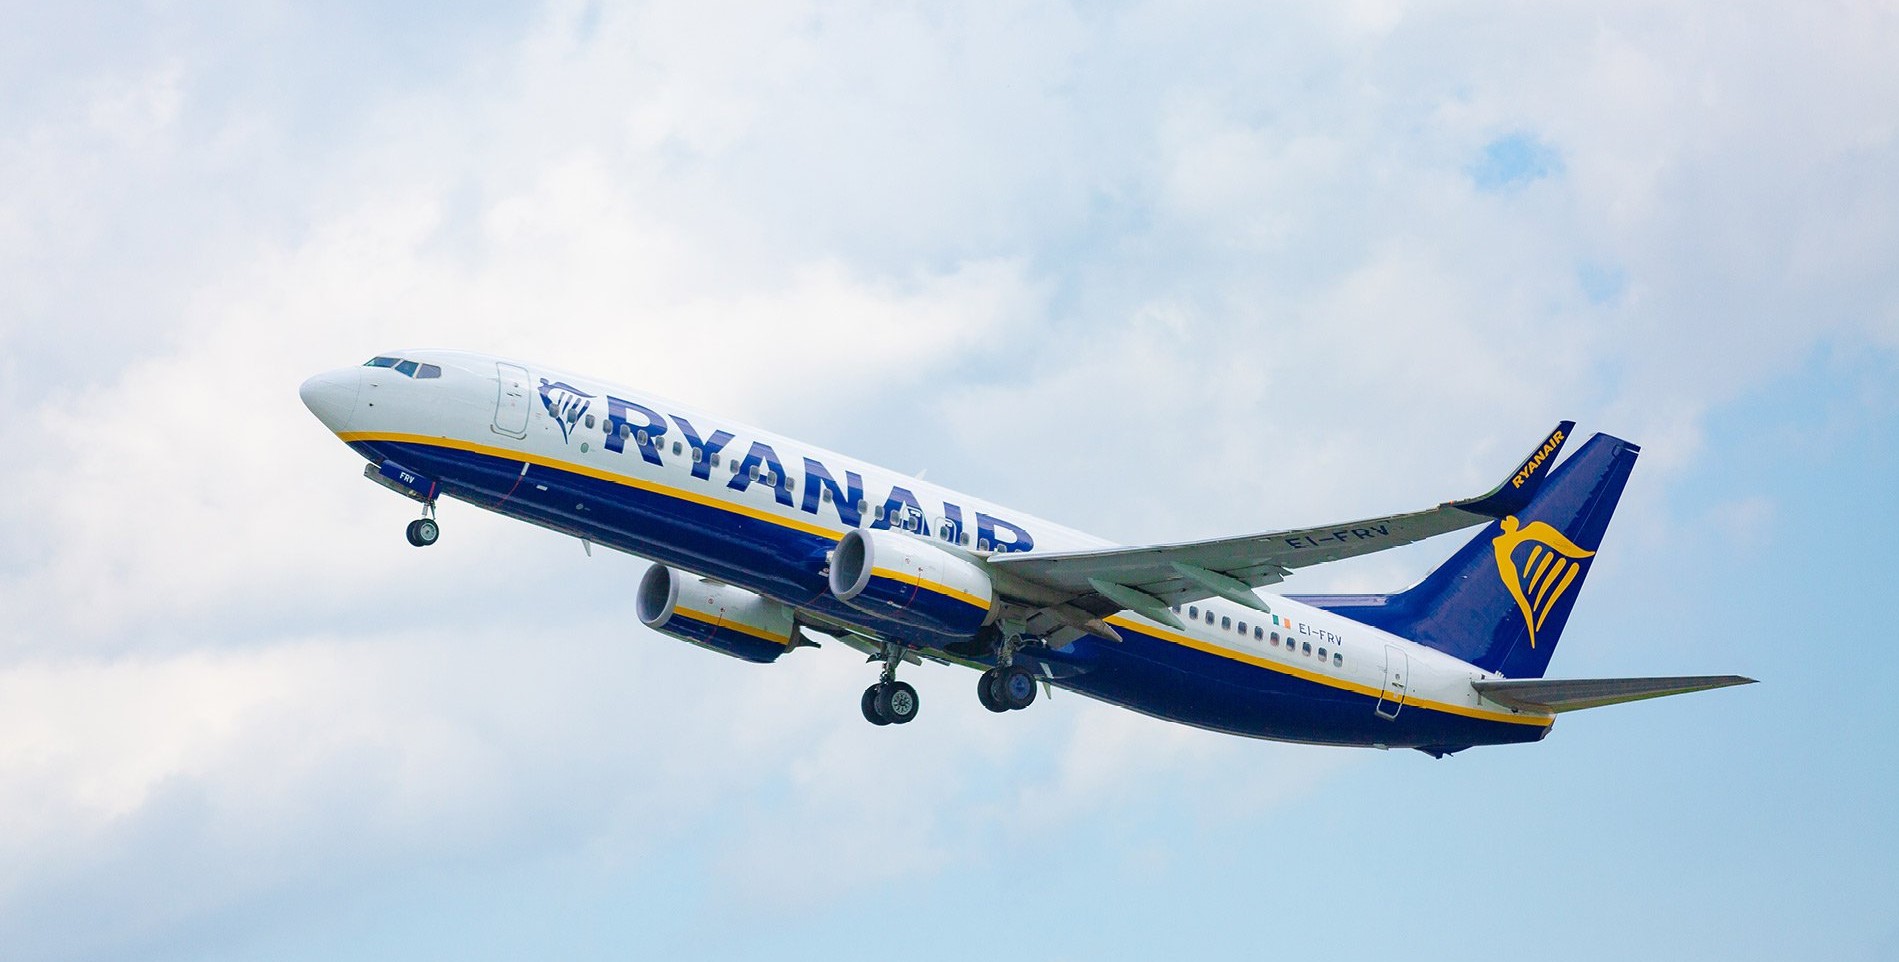 Significant ! Pilot  Wins  Employment  Status  Challenge  Against  Ryanair As  Court  Upheld  a  Decision  He Was  An  Agency  Worker  For  Ryanair.